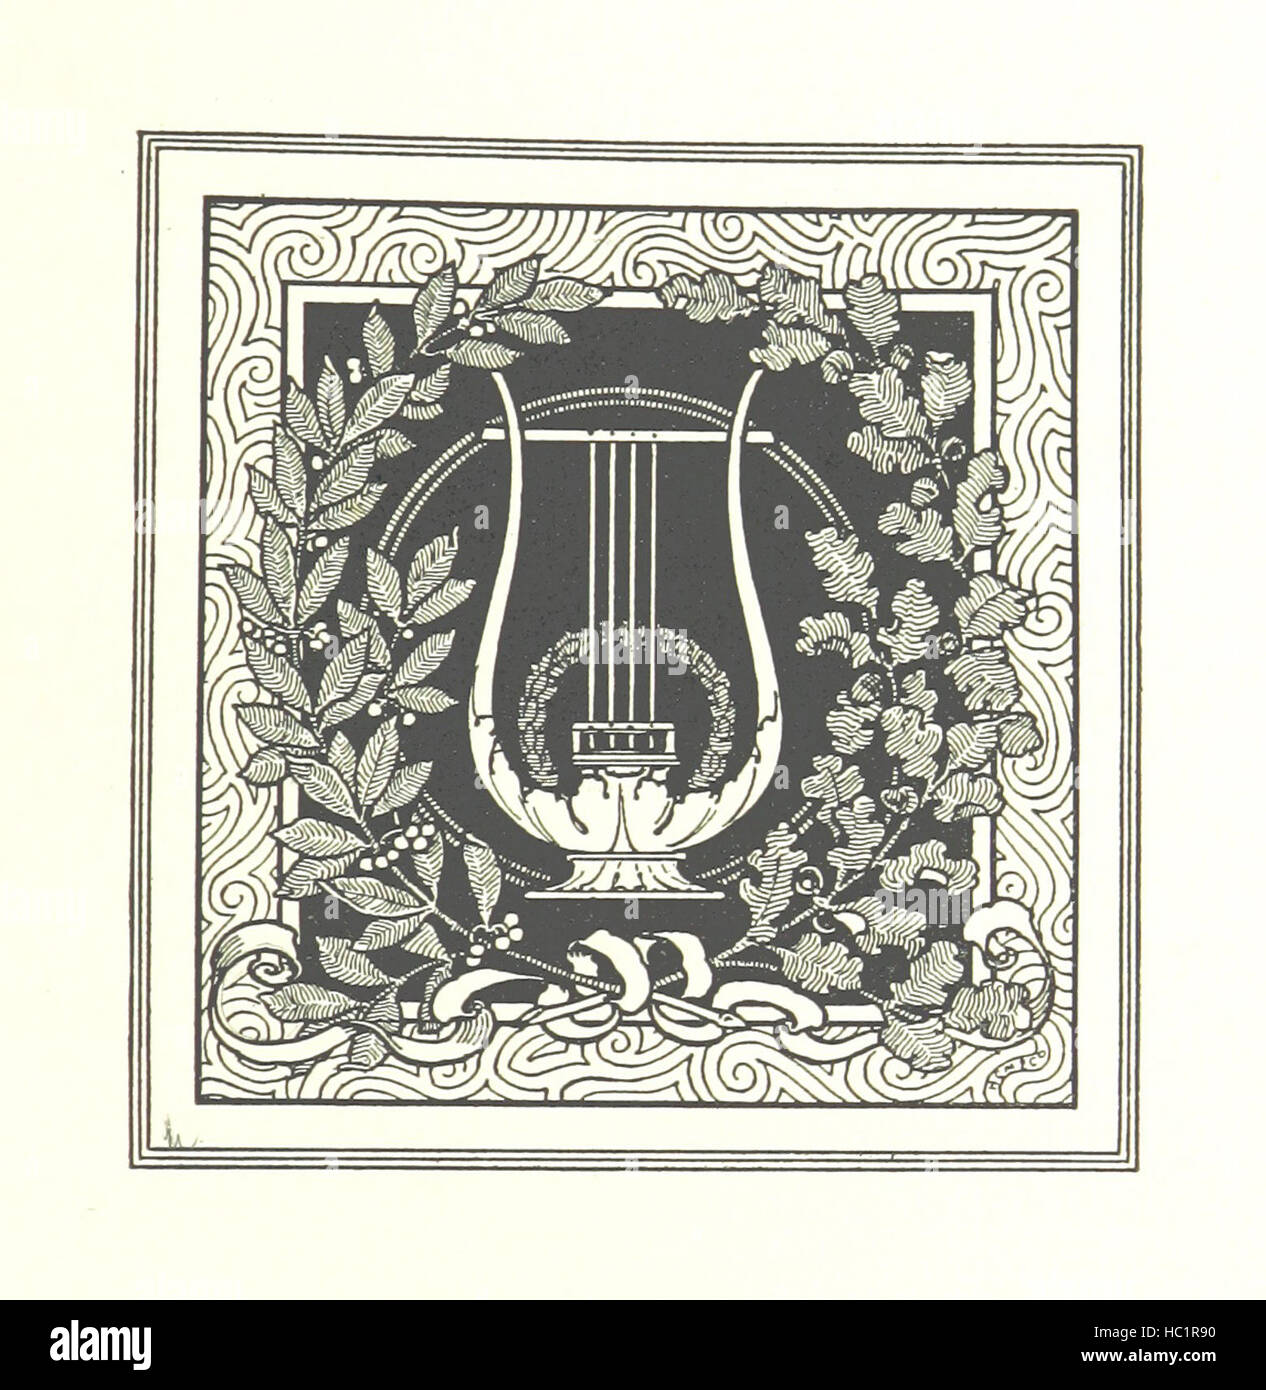 Image taken from page 13 of 'The Music of the Poets. A Musician's Birthday Book. Edited by E. d'Esterre-Keeling' Image taken from page 13 of 'The Music of the Stock Photo